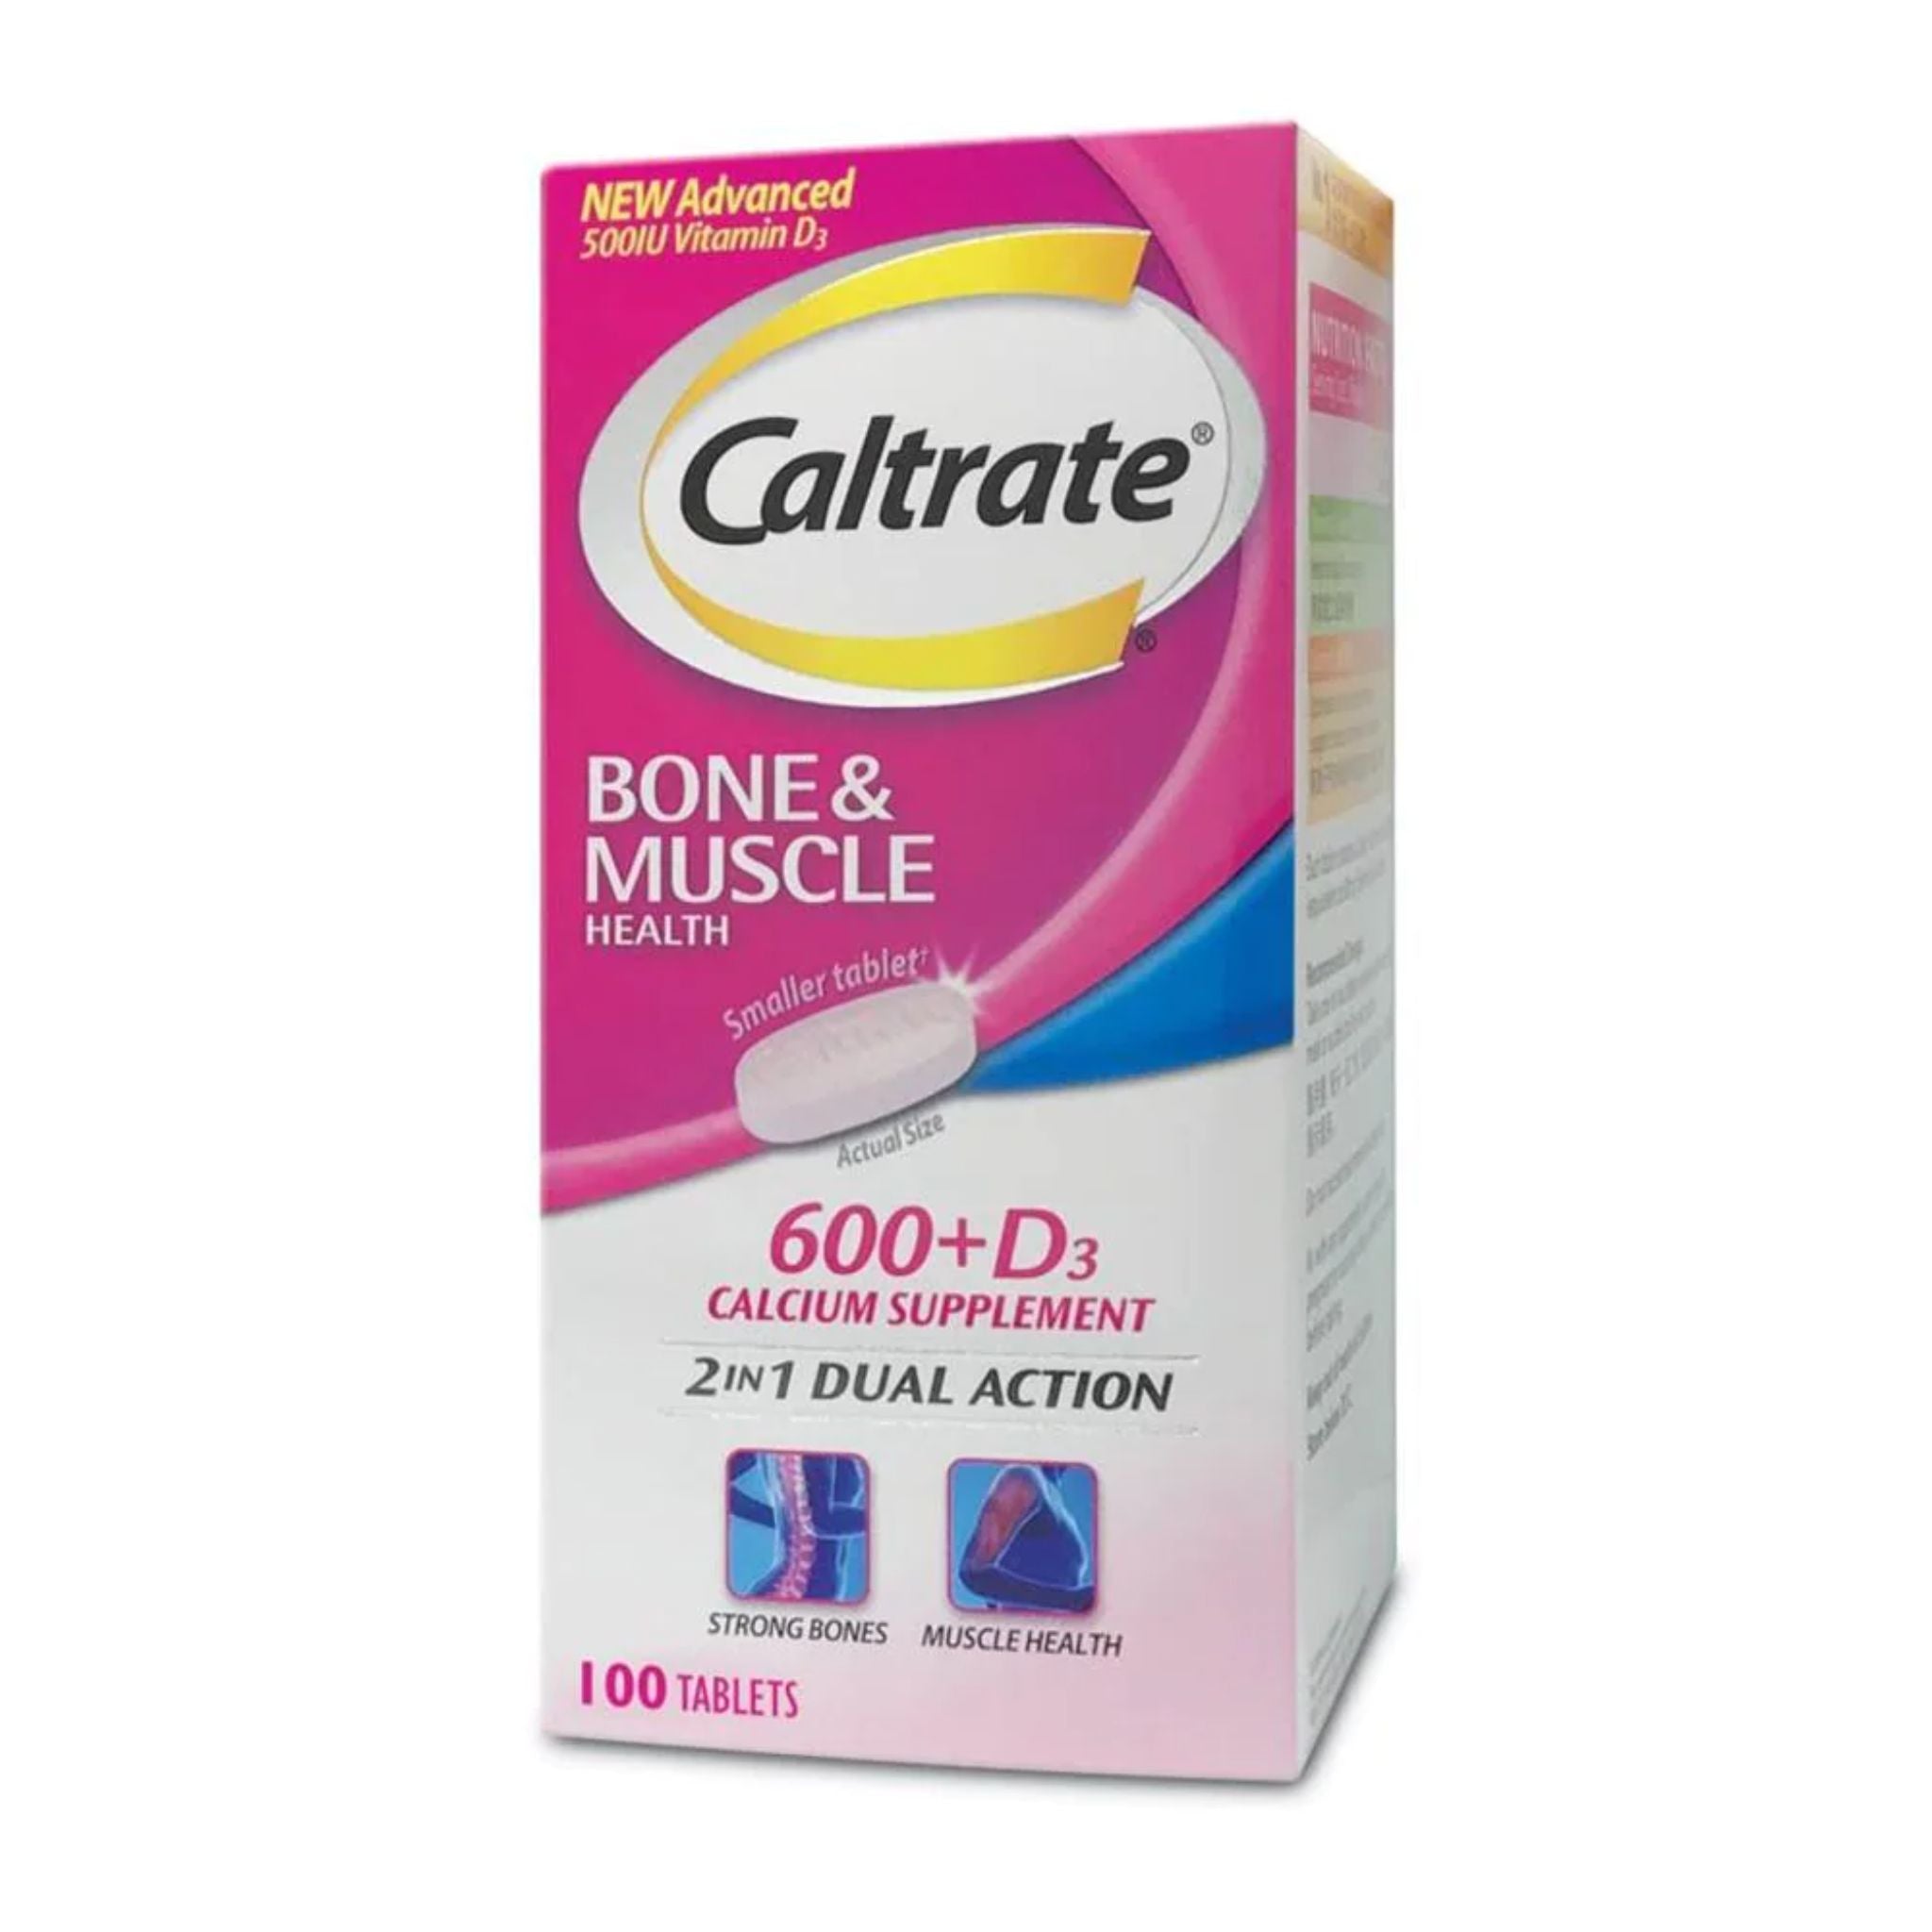 CALTRATE Bone & Muscle 600+D3 Calcium Supplement 2 in1 Dual Action 100 Tablets